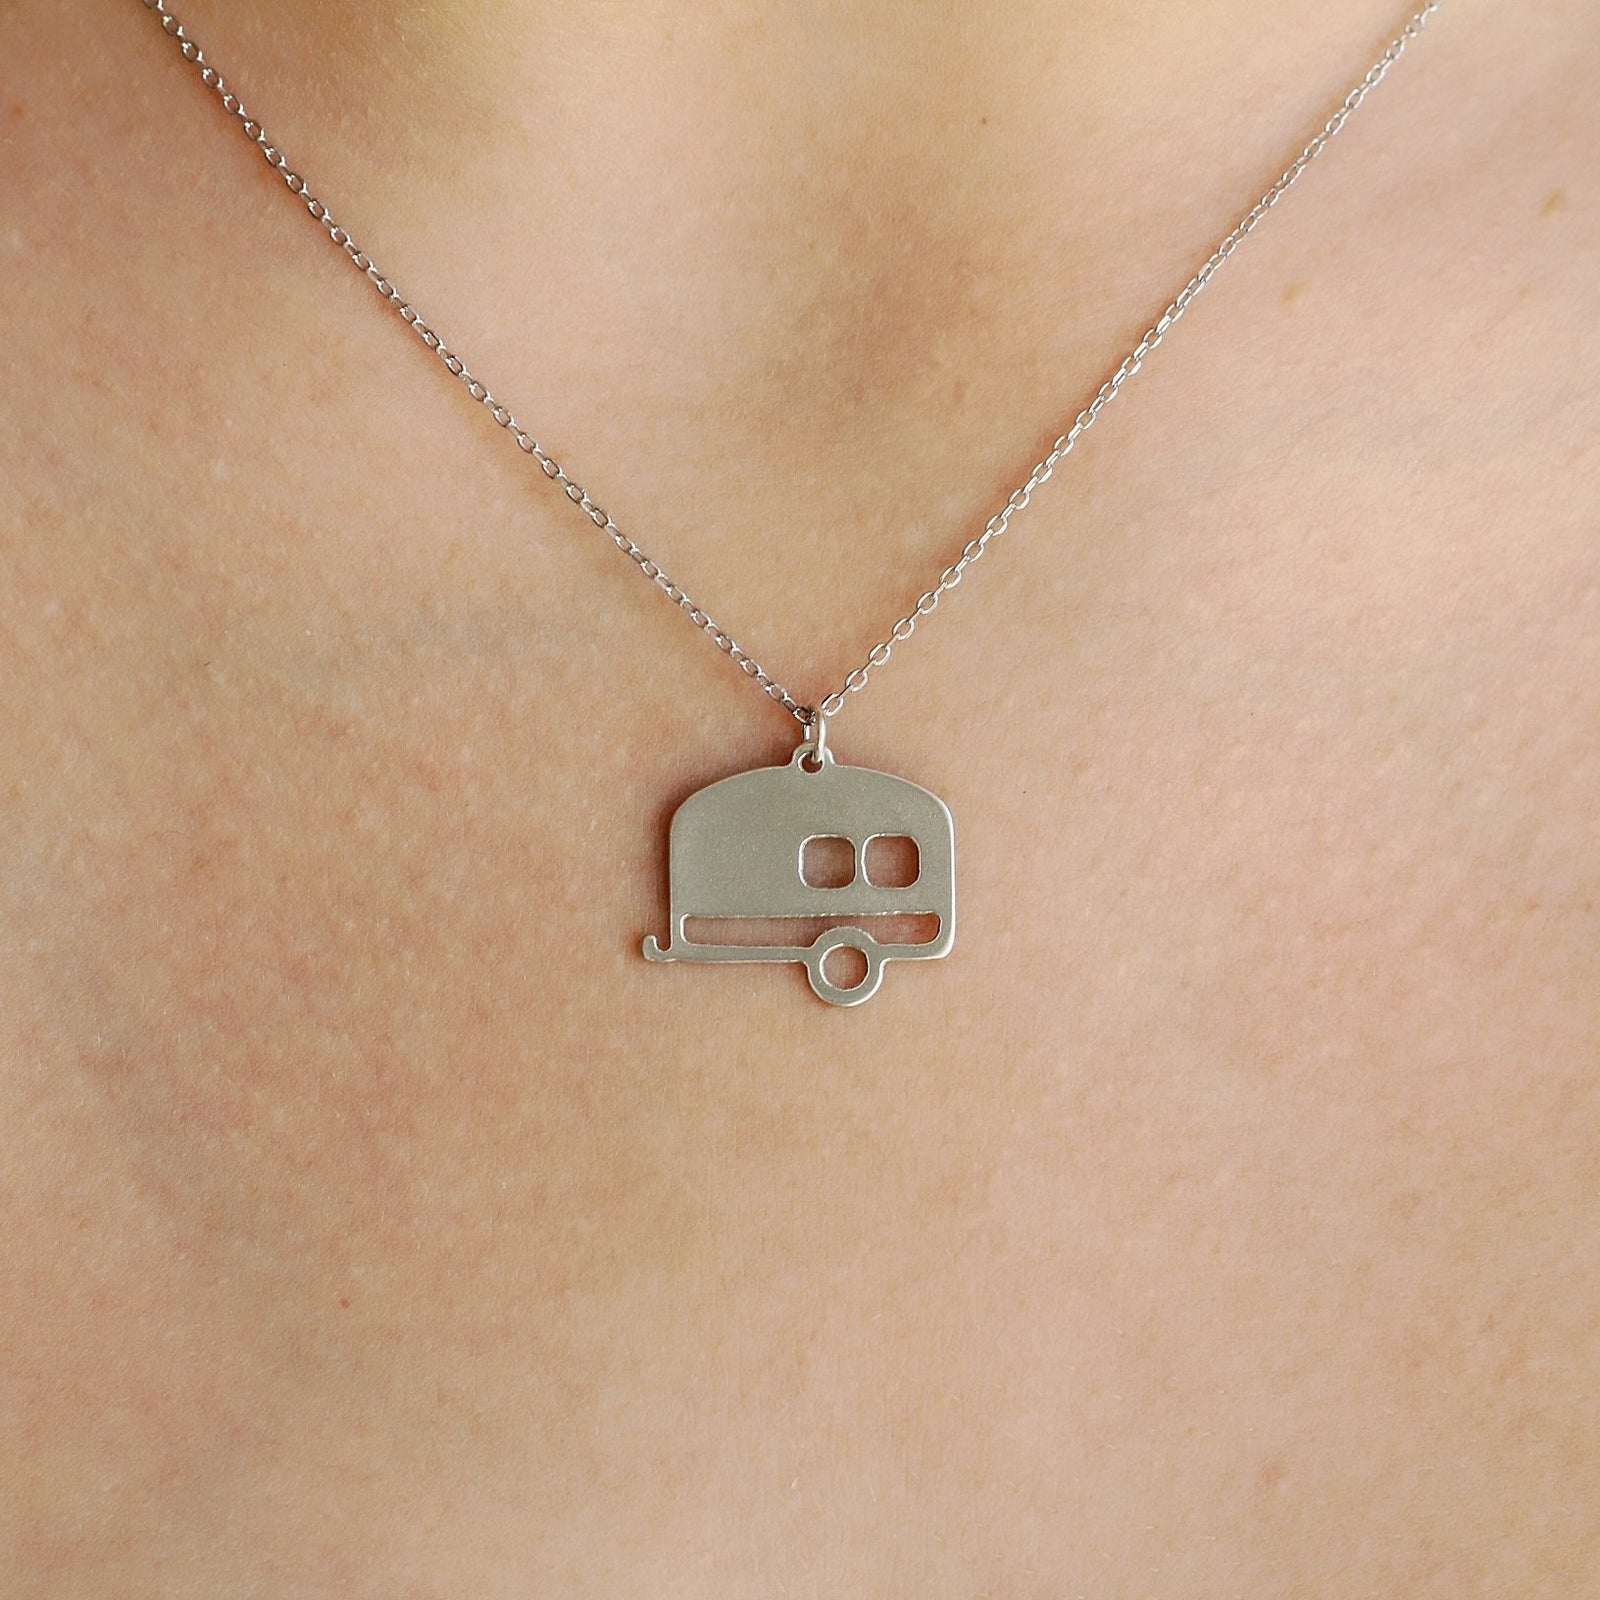 Create Your Own Trail Camper Necklace